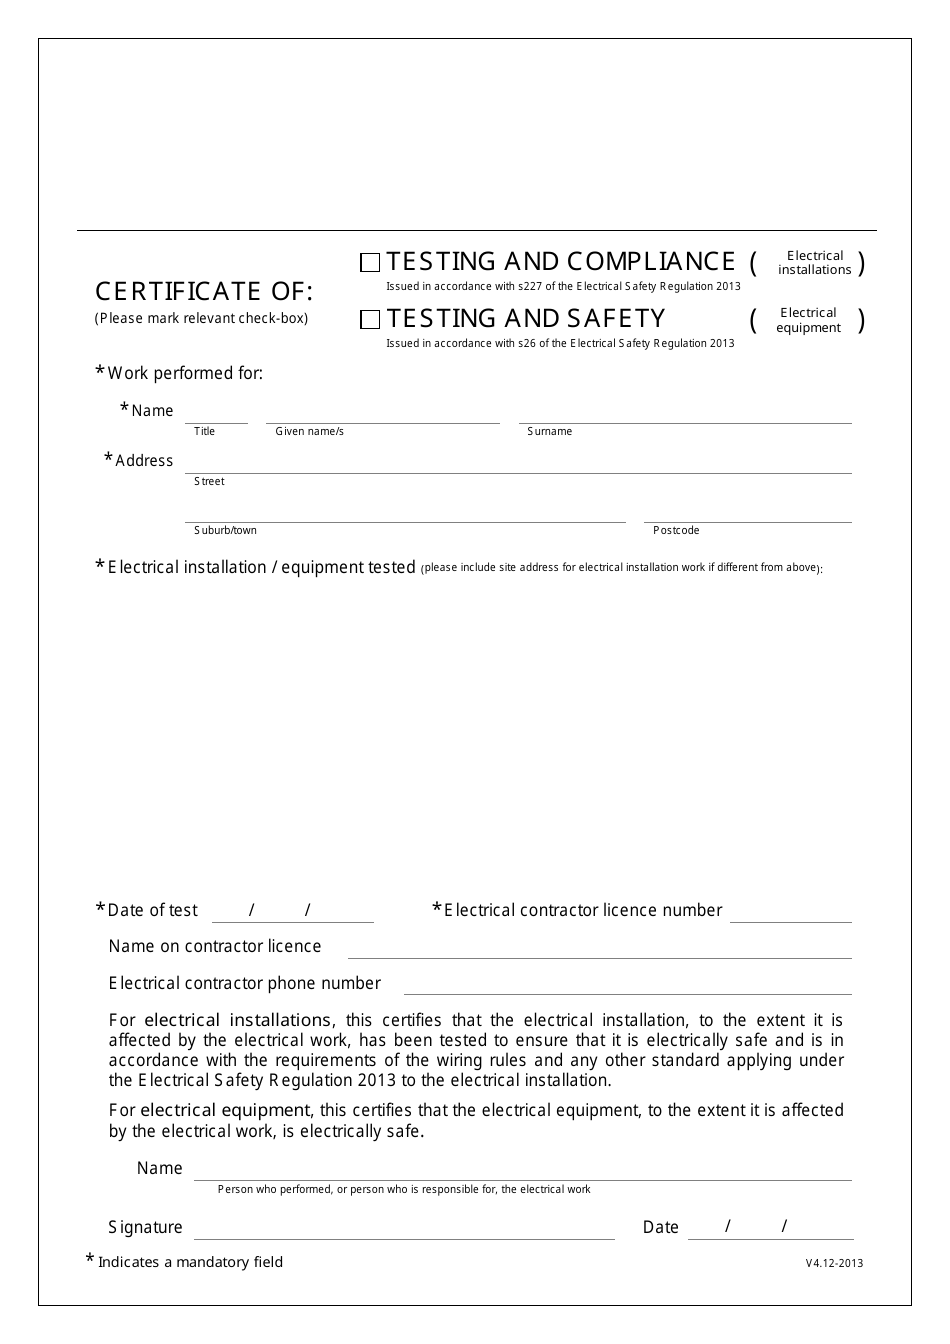 Certificate of Compliance - Queensland, Australia, Page 1